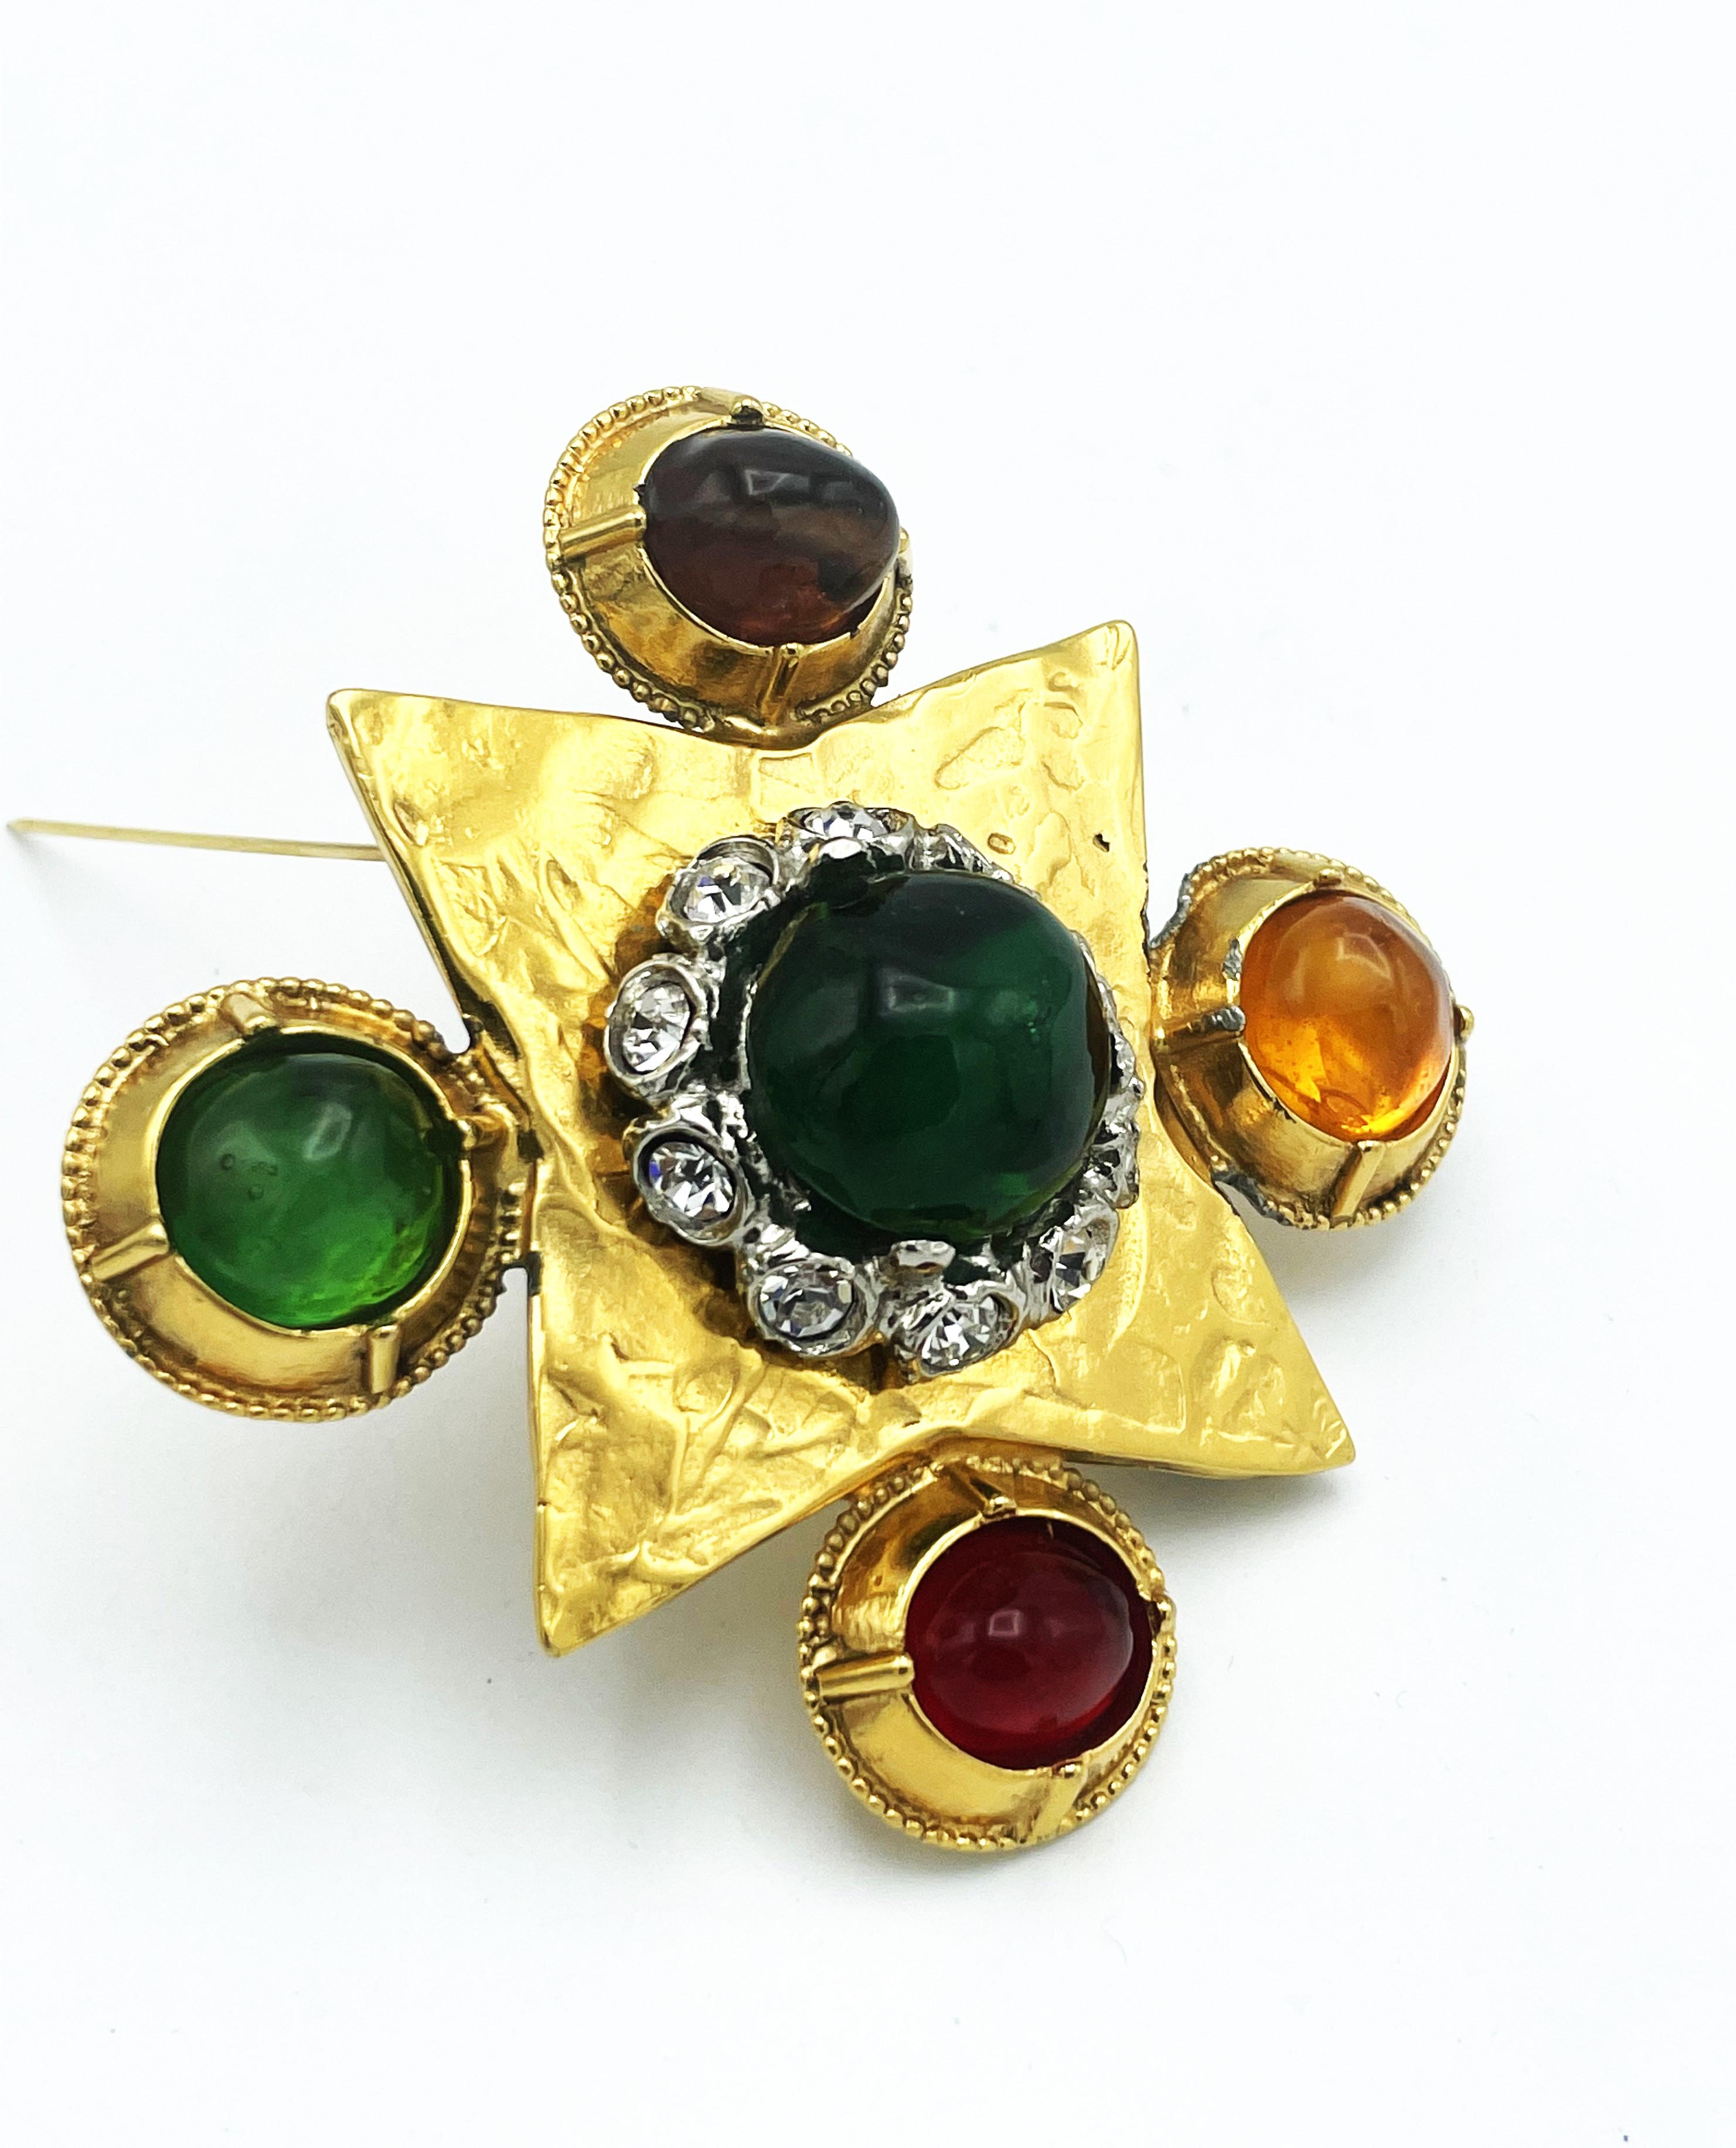 Yves Sant Laurent  rive gauch by Robert Goossens cross brooch in hammered gilt metal polychrome resin cabochons and rhinestones.
The green resin cabochon in the middle is surrounded by set clear rhinestones. At the corner 4 more collored resin